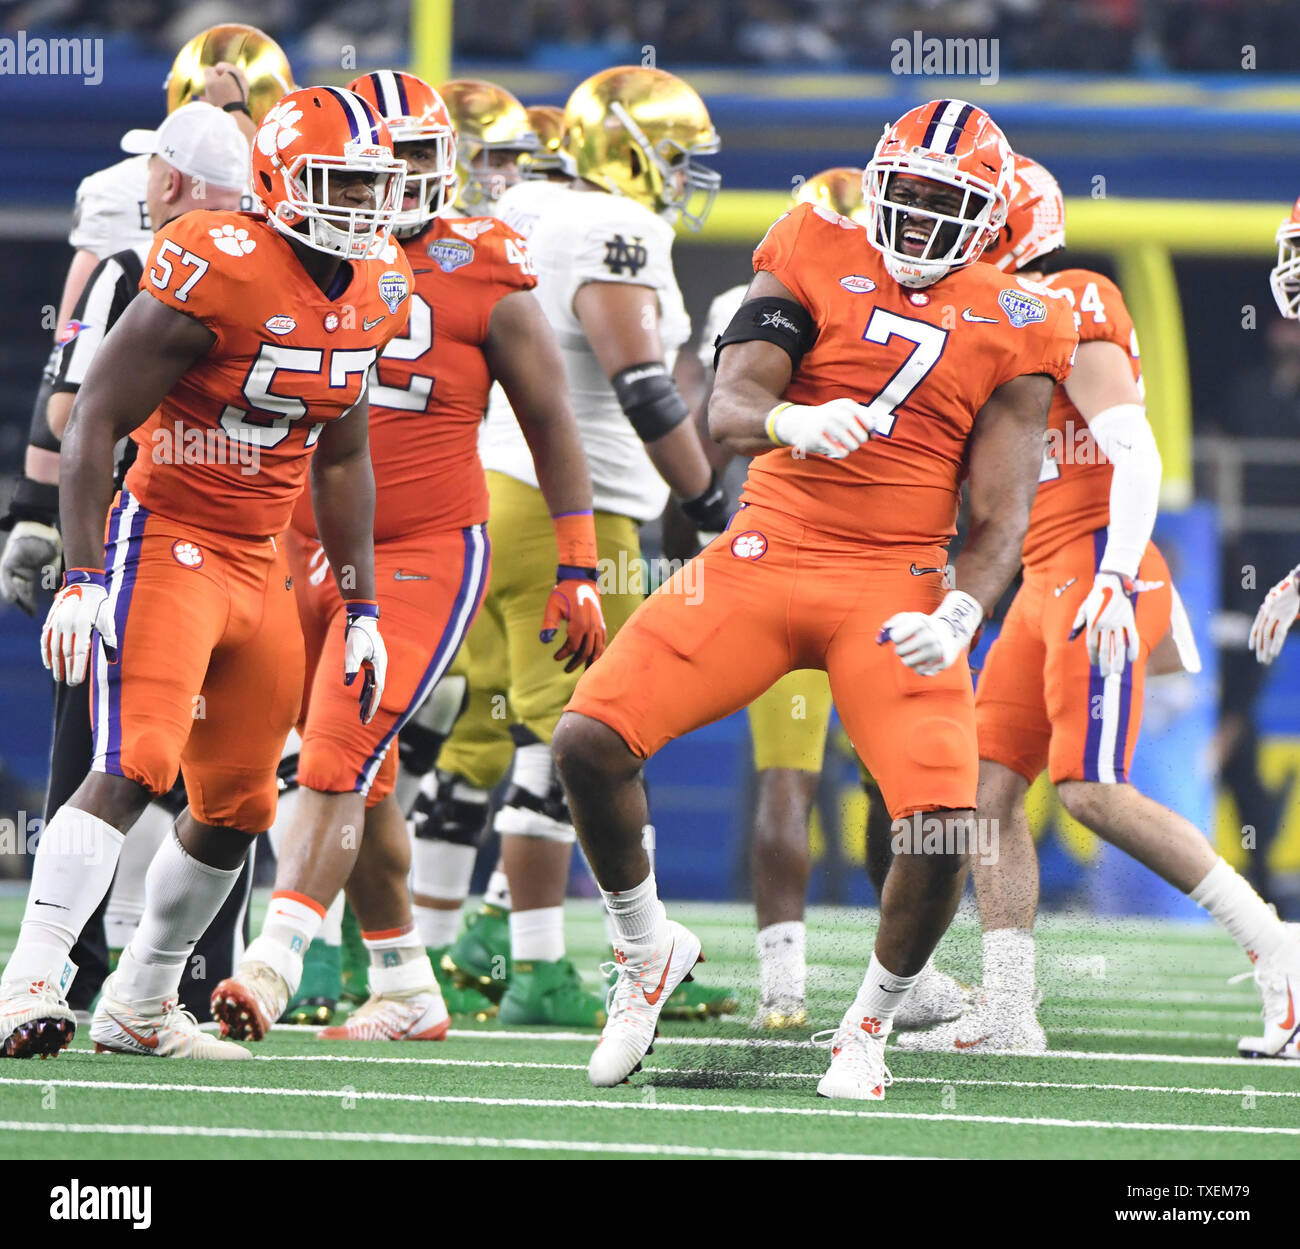 Clemson's Austin Bryant celebrates one of his sacks of Notre Dame quarterback Ian Book in the College Football Playoff Semifinal at the Goodyear Cotton Bowl Classic at AT&T Stadium in Arlington, Texas on December 29, 2018. The Tigers won 30-3 and will face the winner of the CFP Semifinal at the Capital One Orange Bowl in the National Championship Game on January 7, 2019. Photo by Ian Halperin/UPI Stock Photo